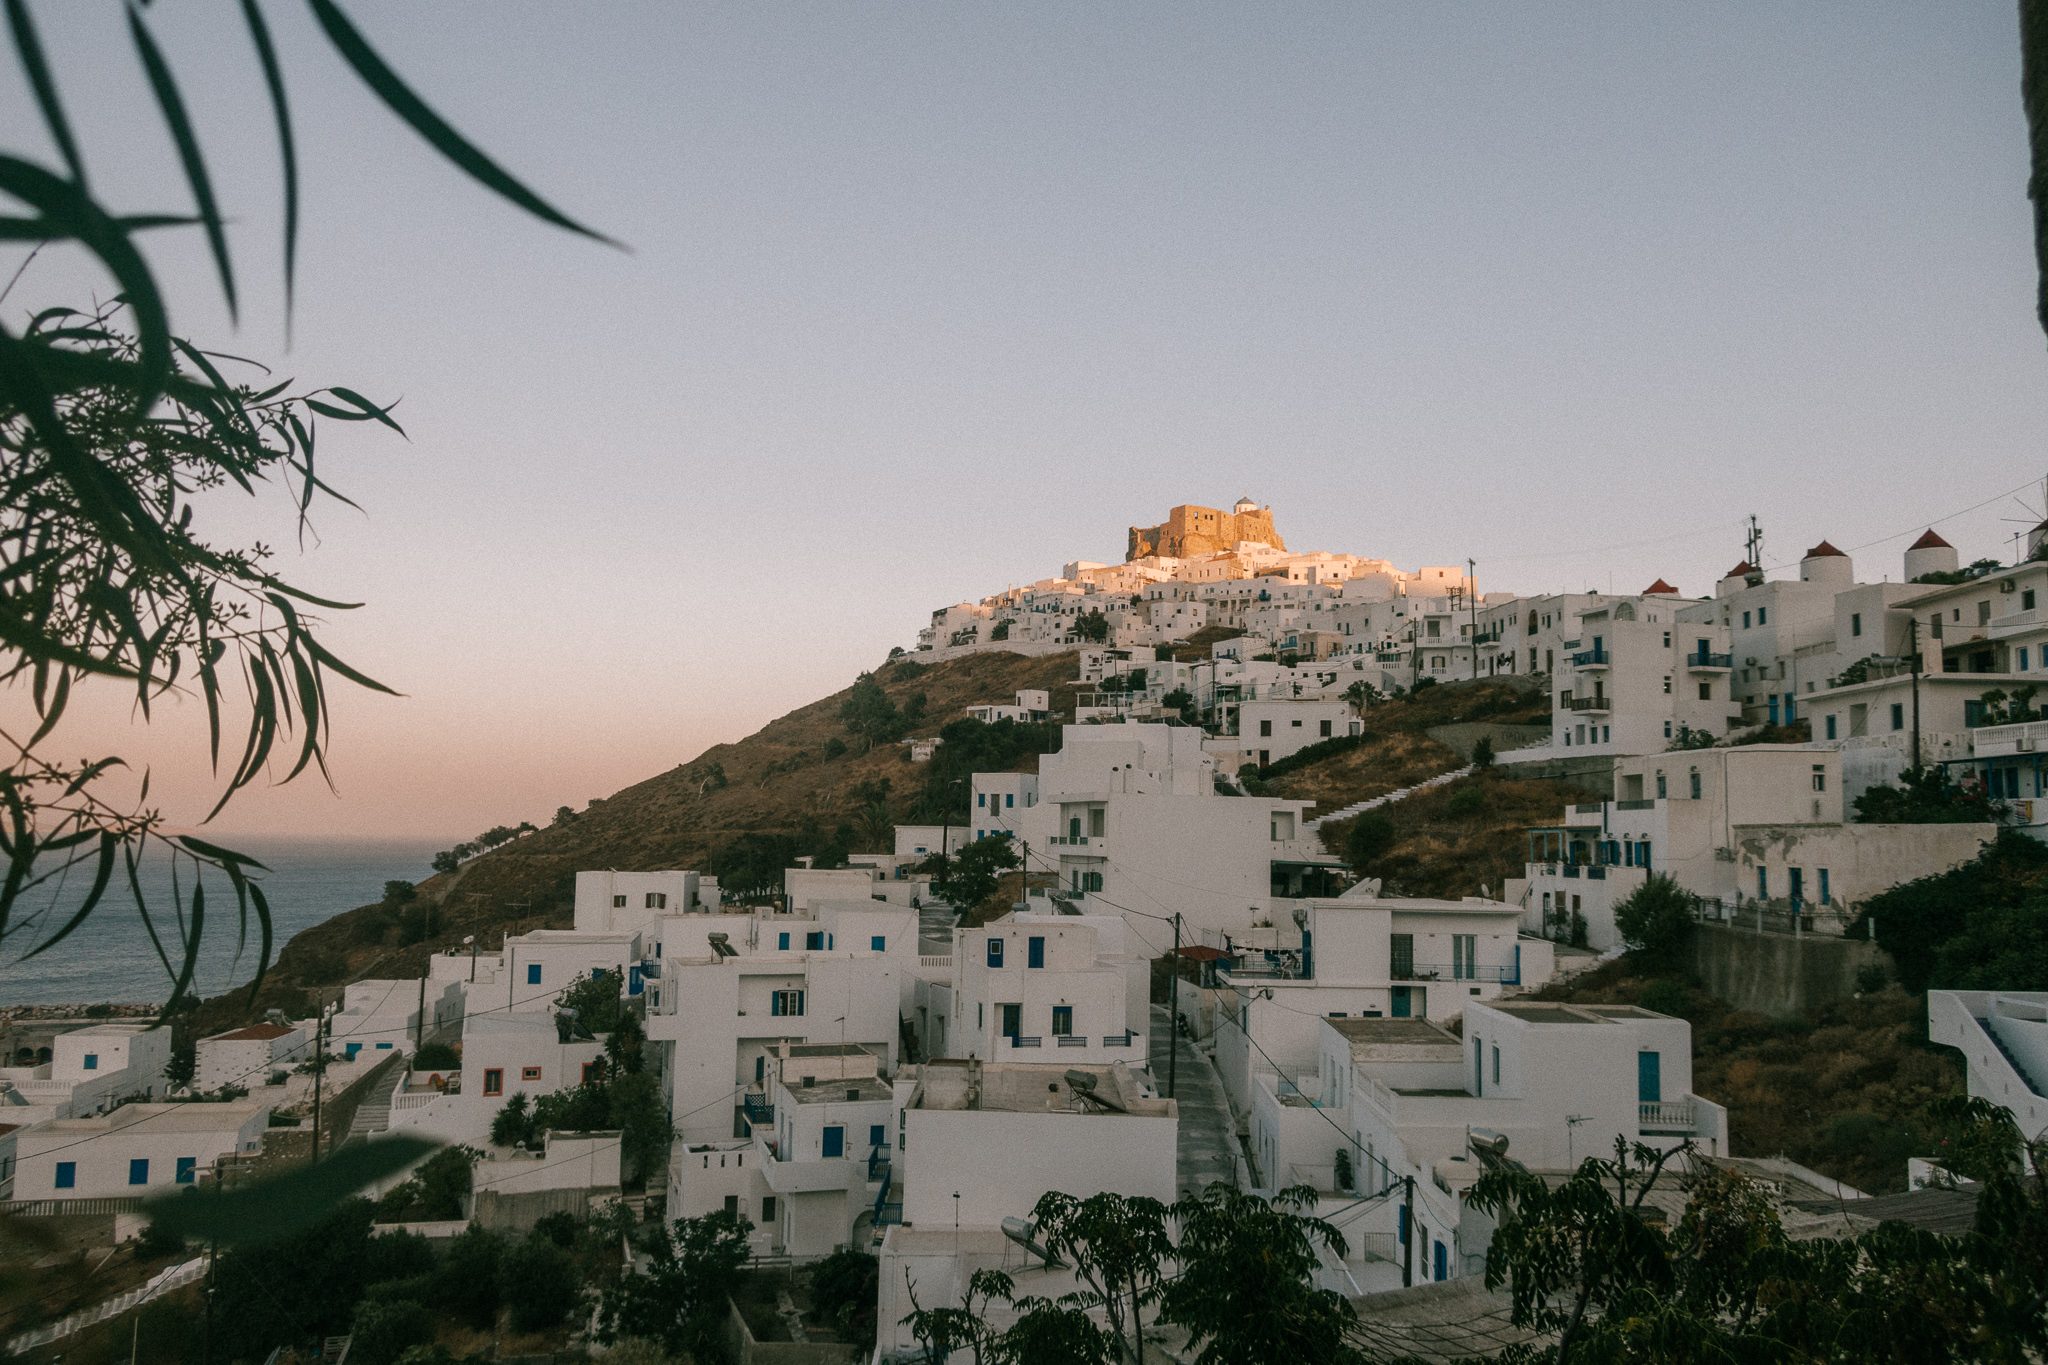 Astypalaia: The quiet Greek island you've probably never heard of